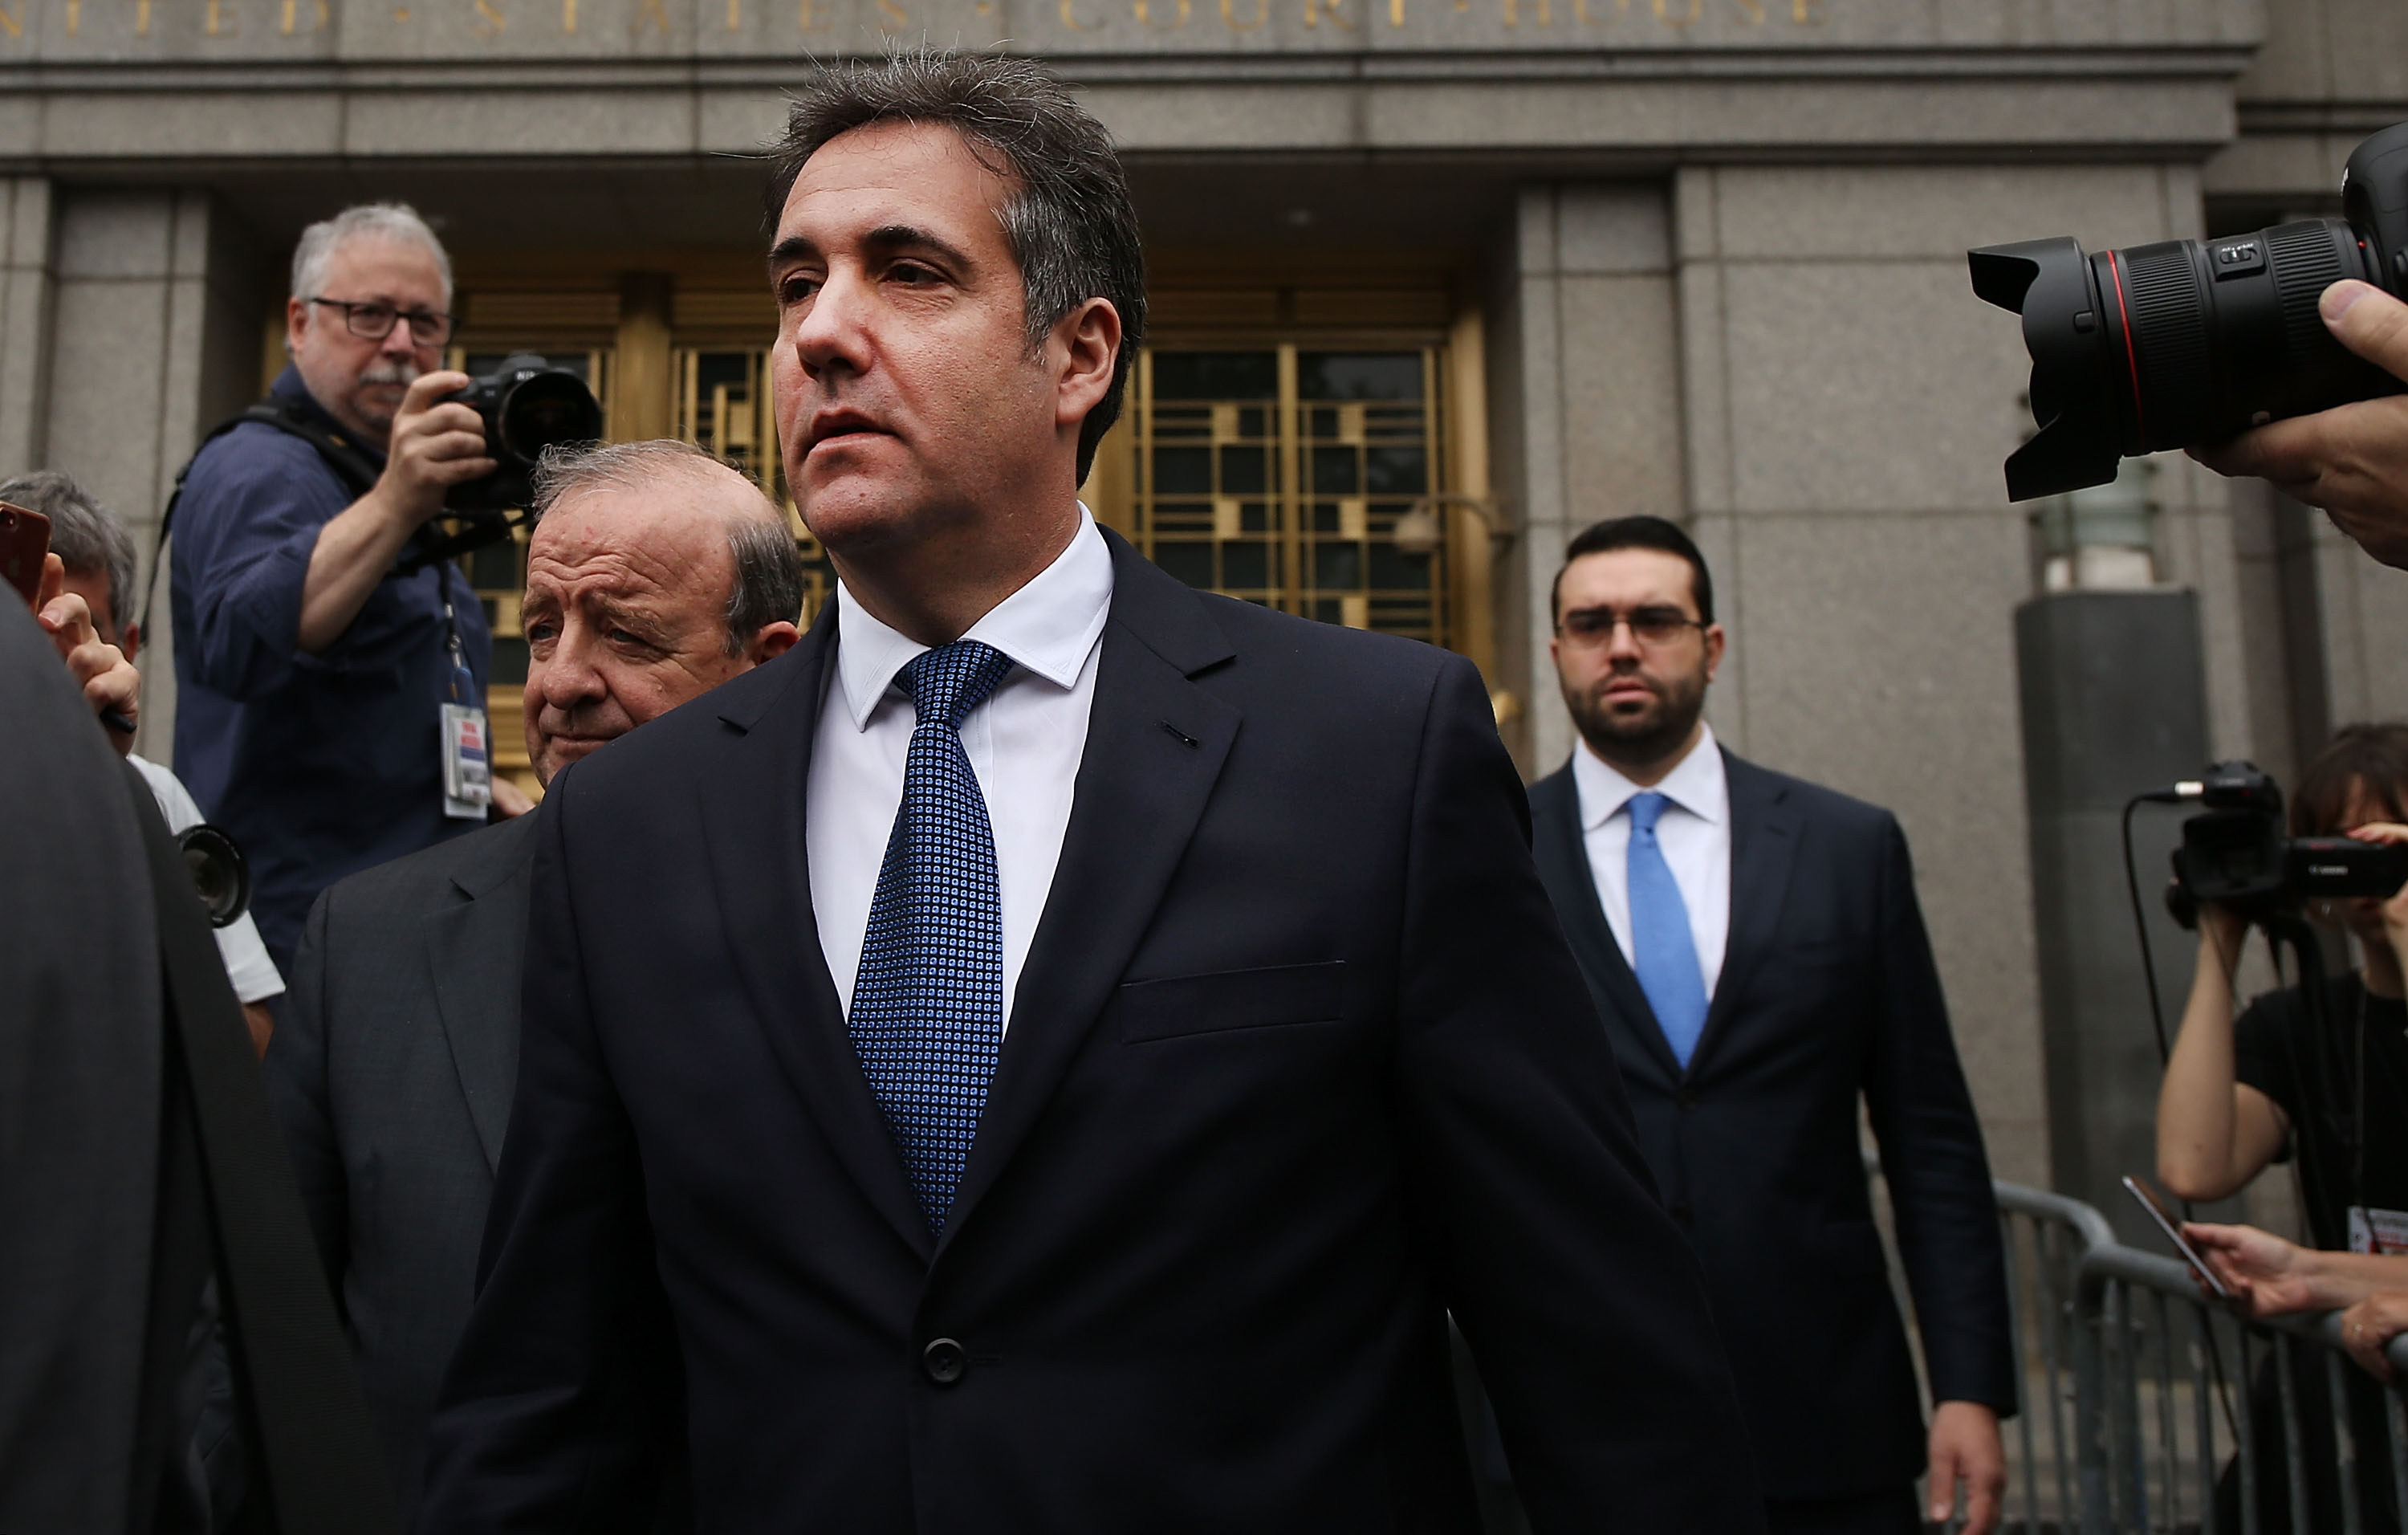 Michael Cohen, longtime personal lawyer and confidante for President Donald Trump, leaves the United States District Court Southern District of New York on May 30, 2018 in New York City. (Spencer Platt&mdash;Getty Images)